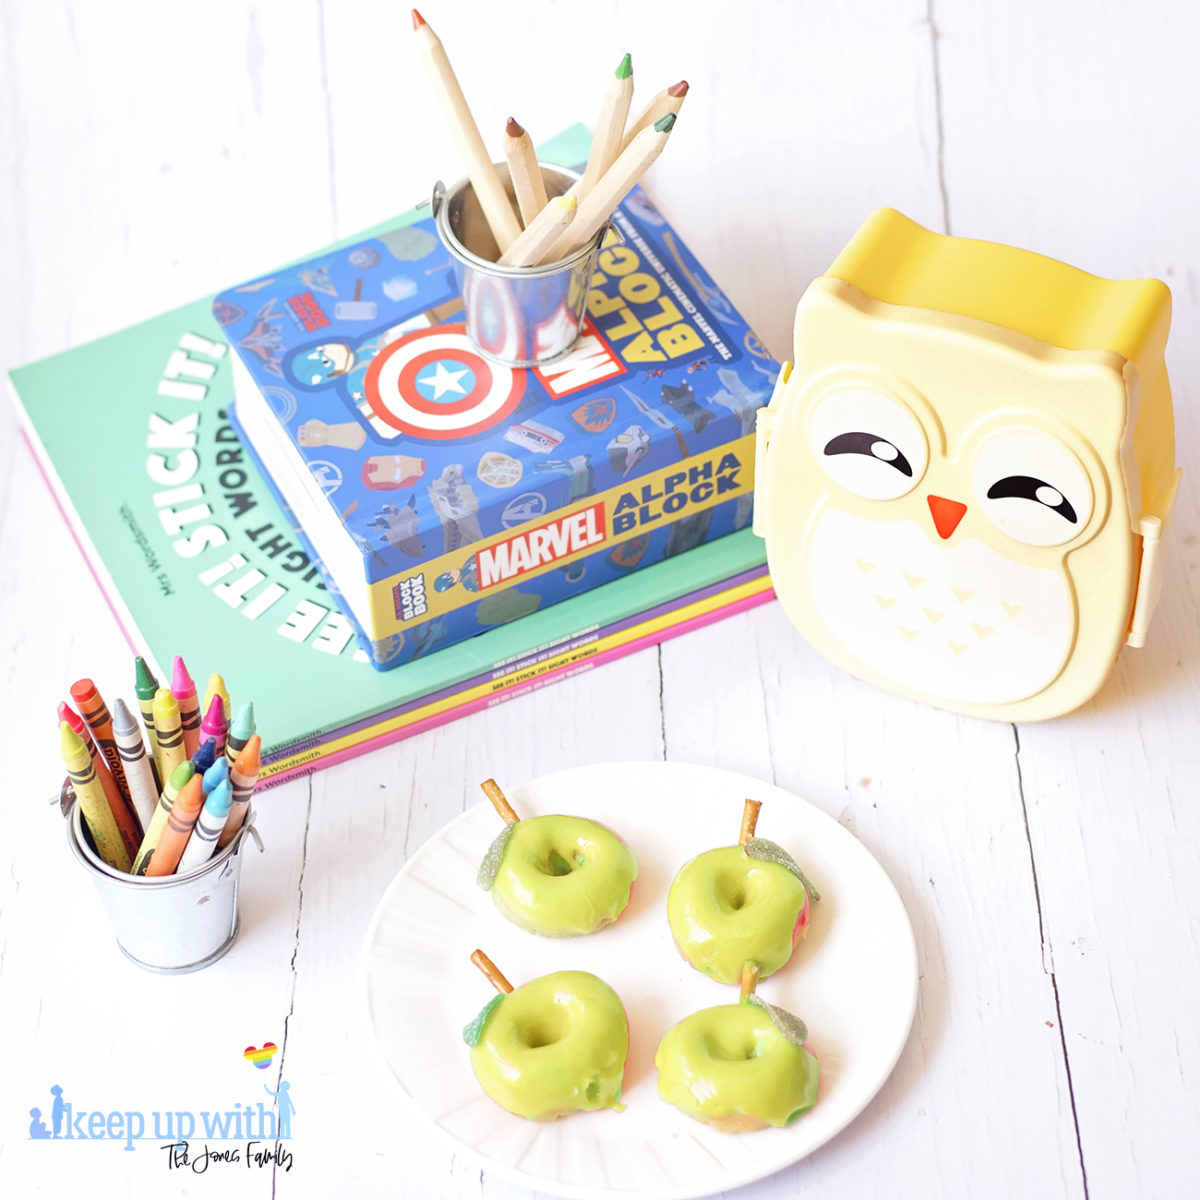 Image shows green apple shaped Back to School Doughnuts on a white Vera Wang plate, sitting on a white wooden surface. There are two small owl shaped bento boxes and books in the background, along with a bucket of crayola crayons. Image by Sara-Jayne from Keep Up With The Jones Family.